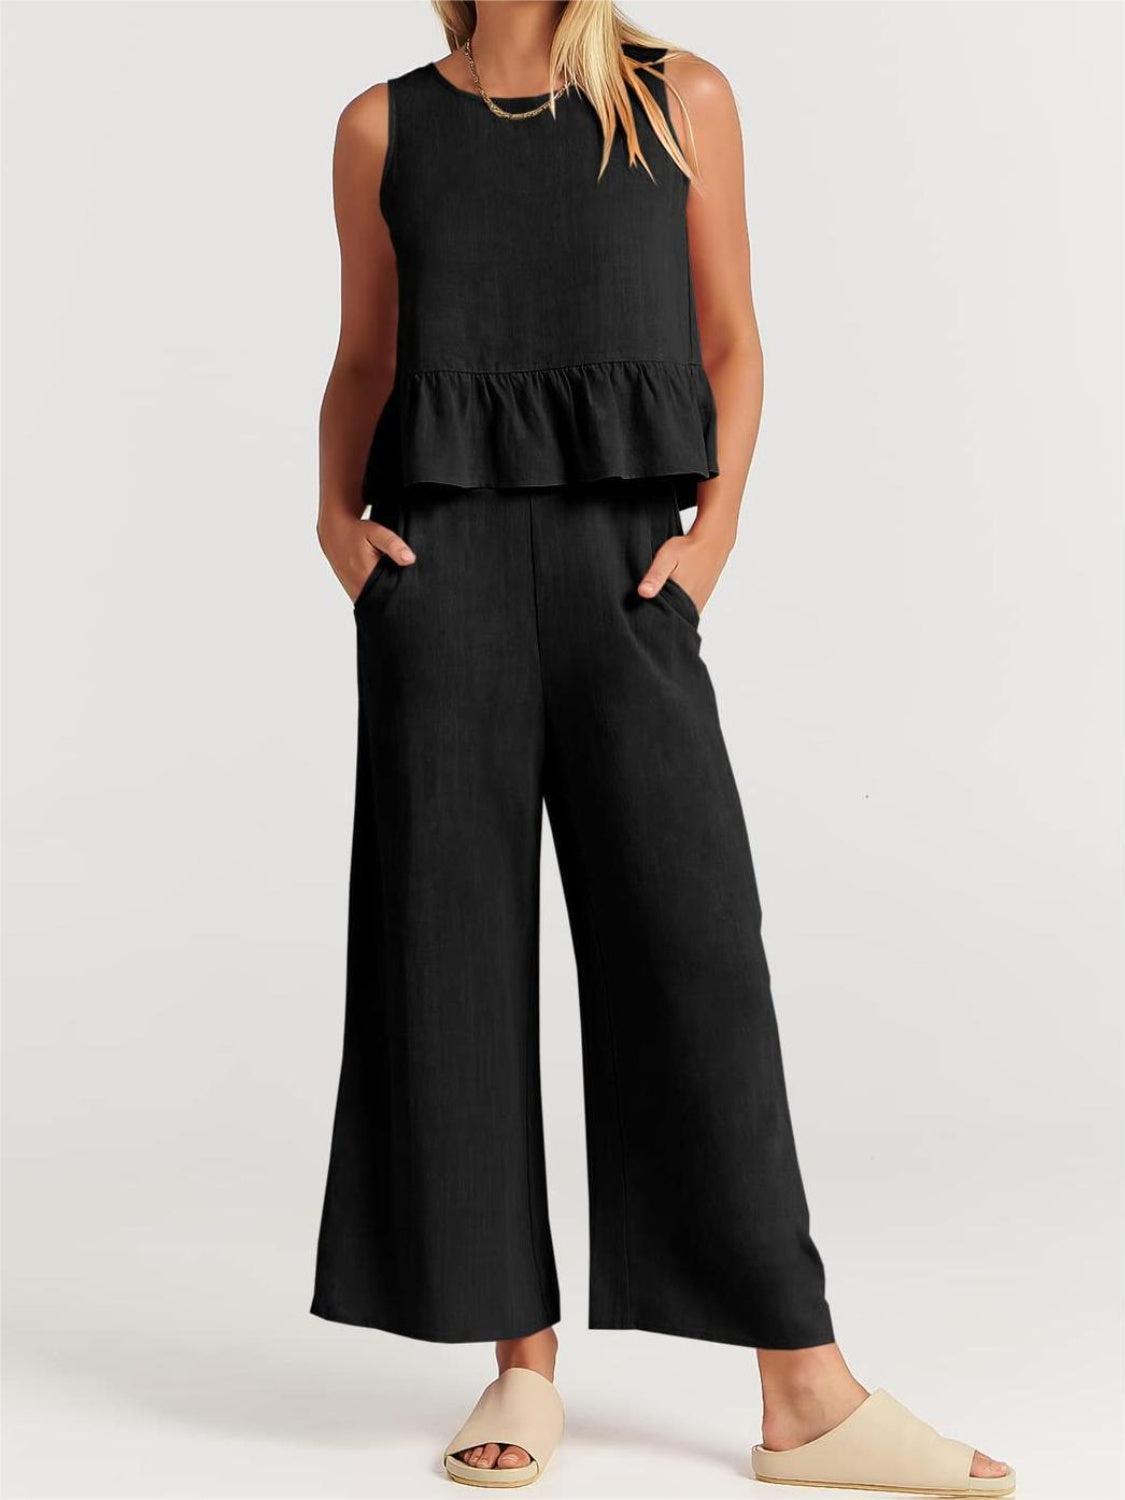 a woman wearing a black top and wide legged pants